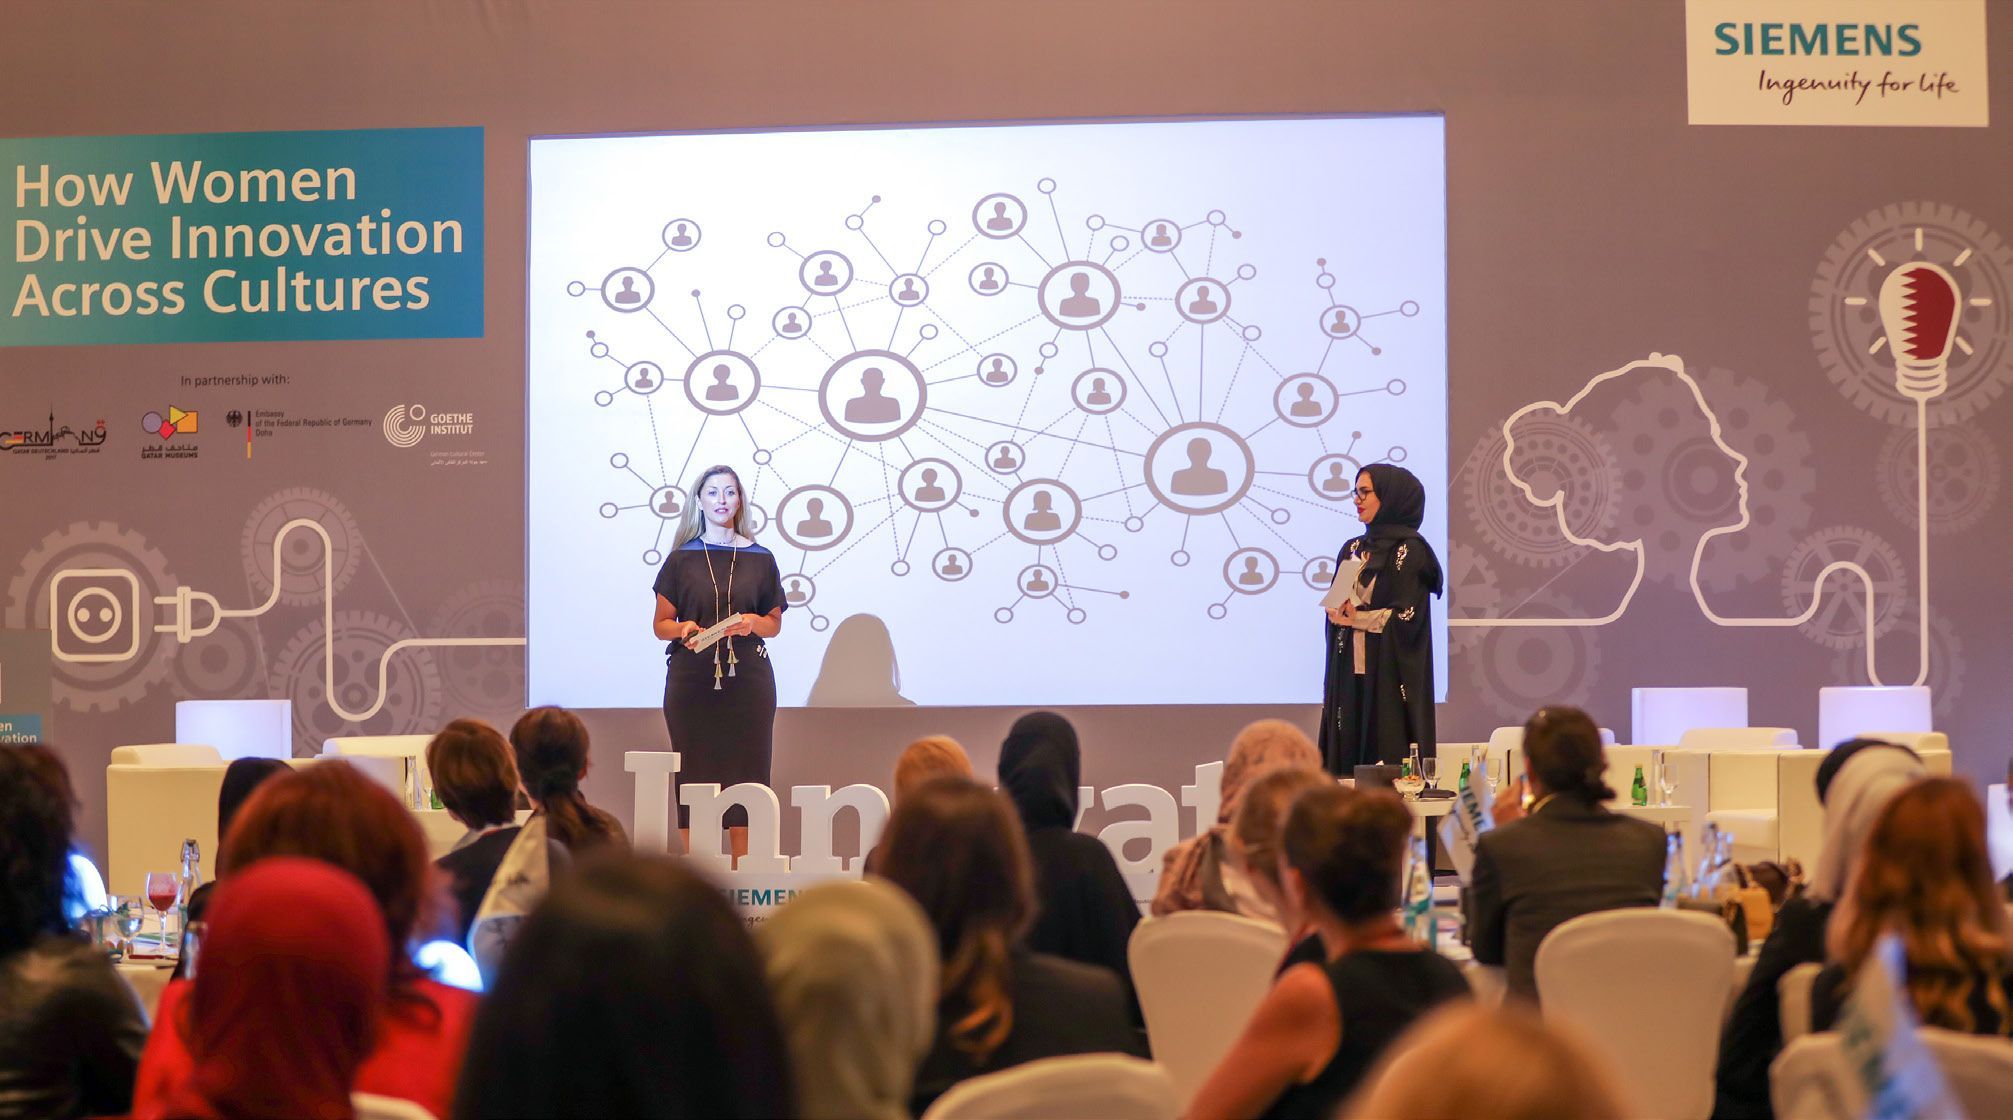 Two women on stage give a presentation to an audience as part of Qatar-Germany 2017.